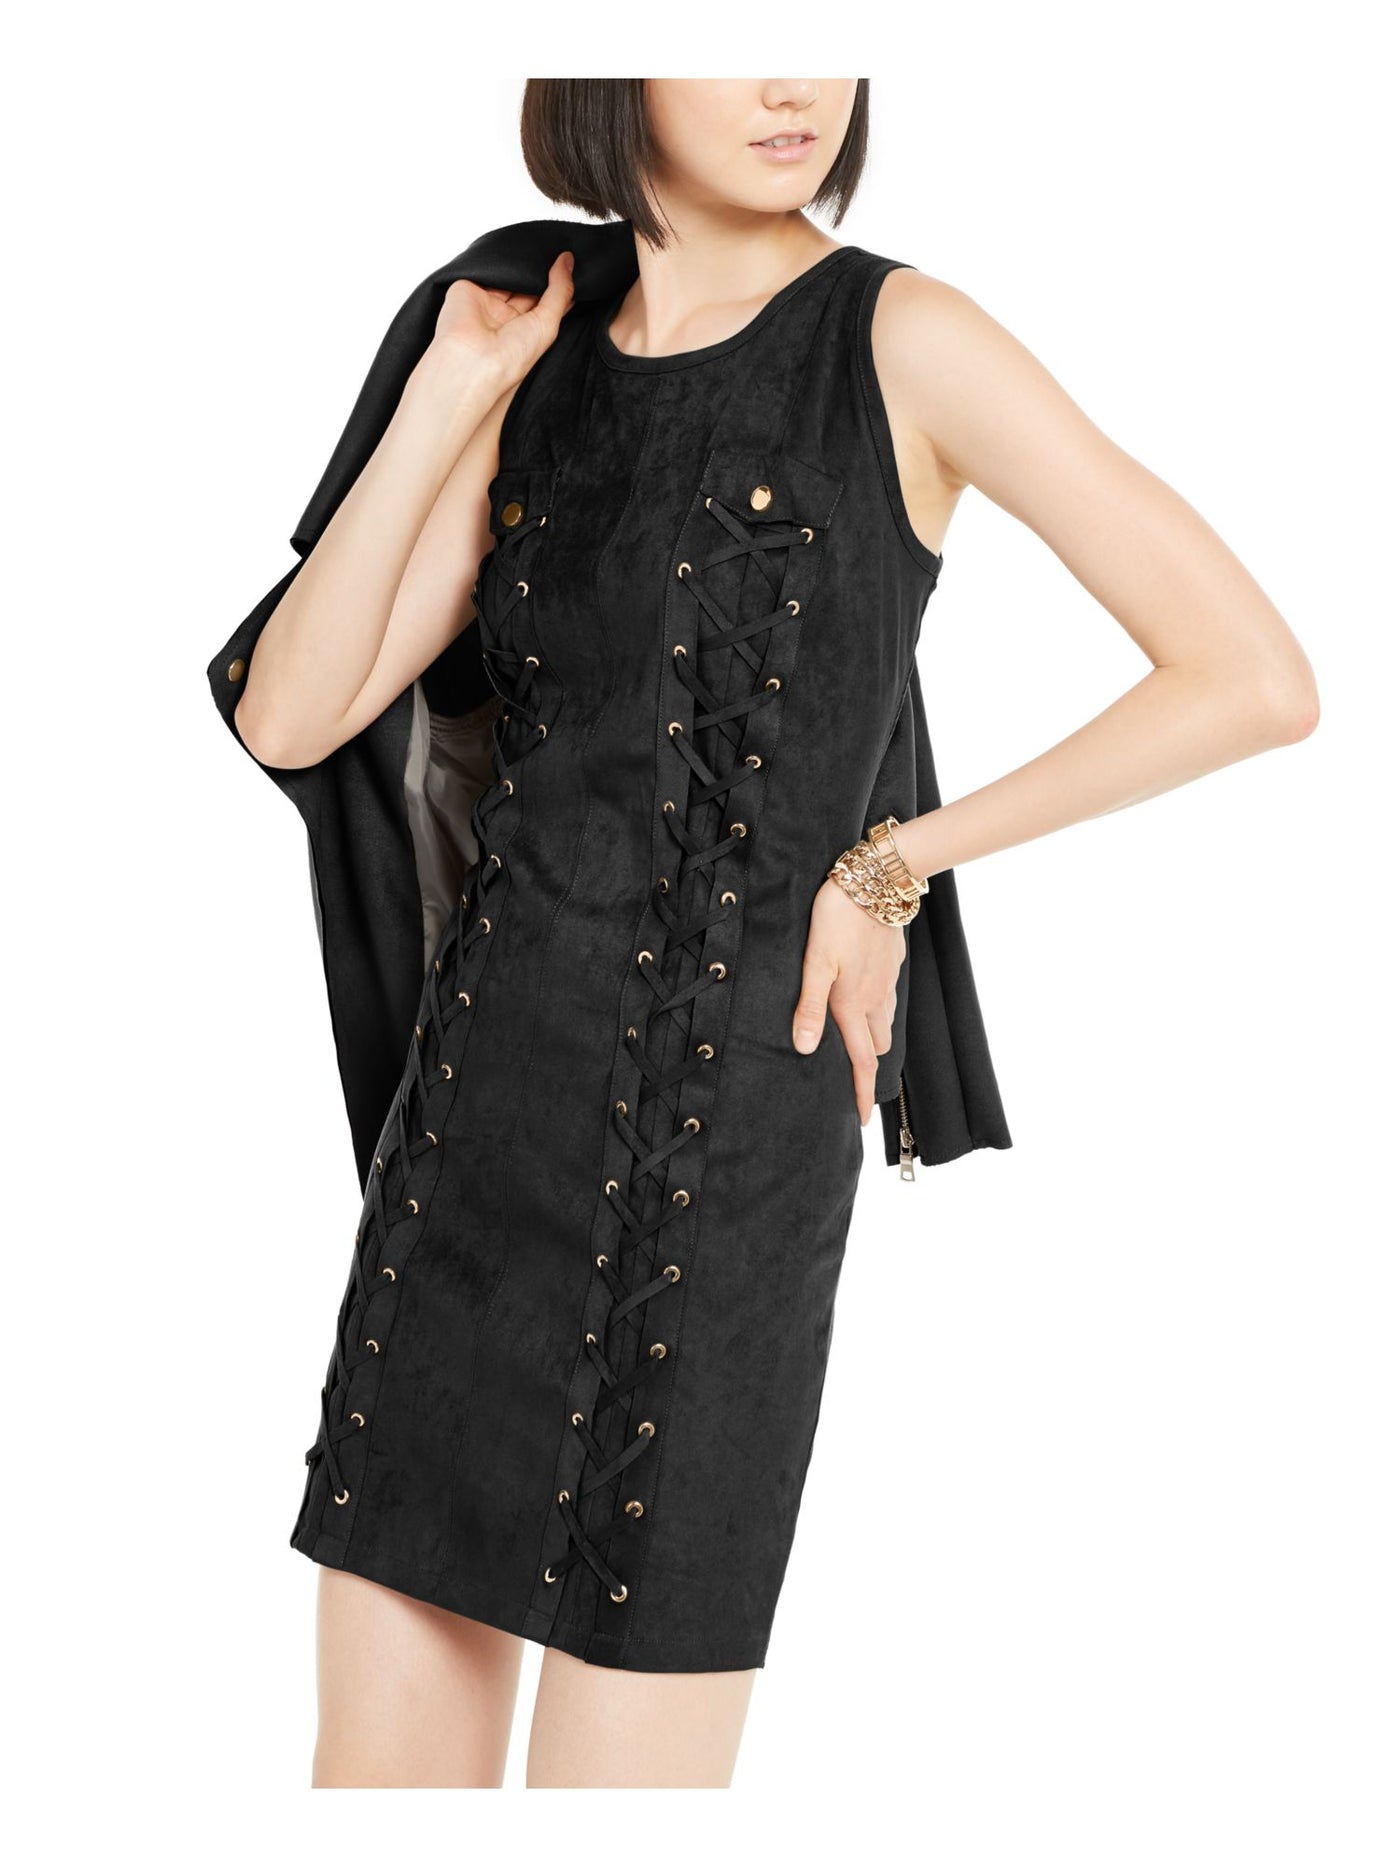 INC Womens Black Faux Suede Lace Printed Sleeveless Jewel Neck Short Evening Fit + Flare Dress XS